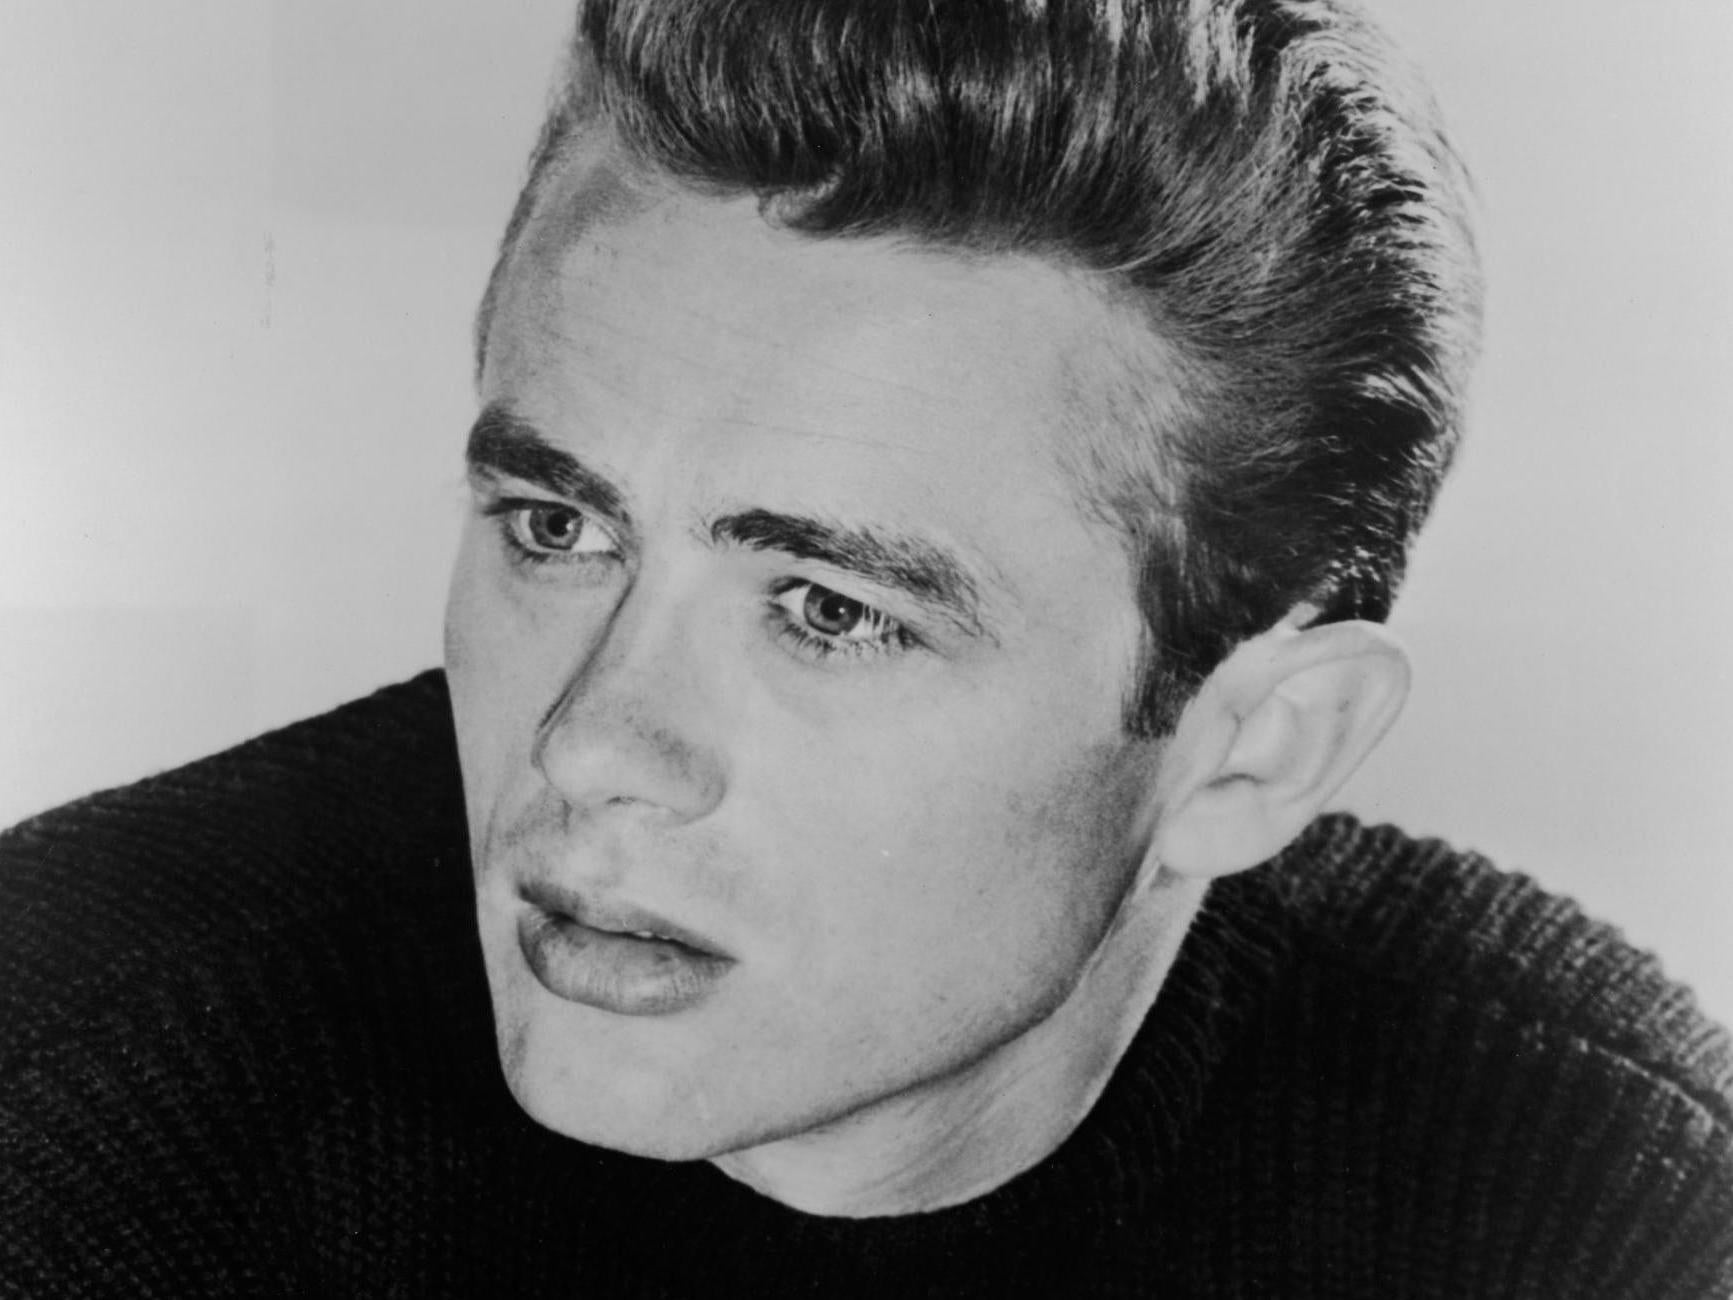 James Dean is pictured in the early Fifties.